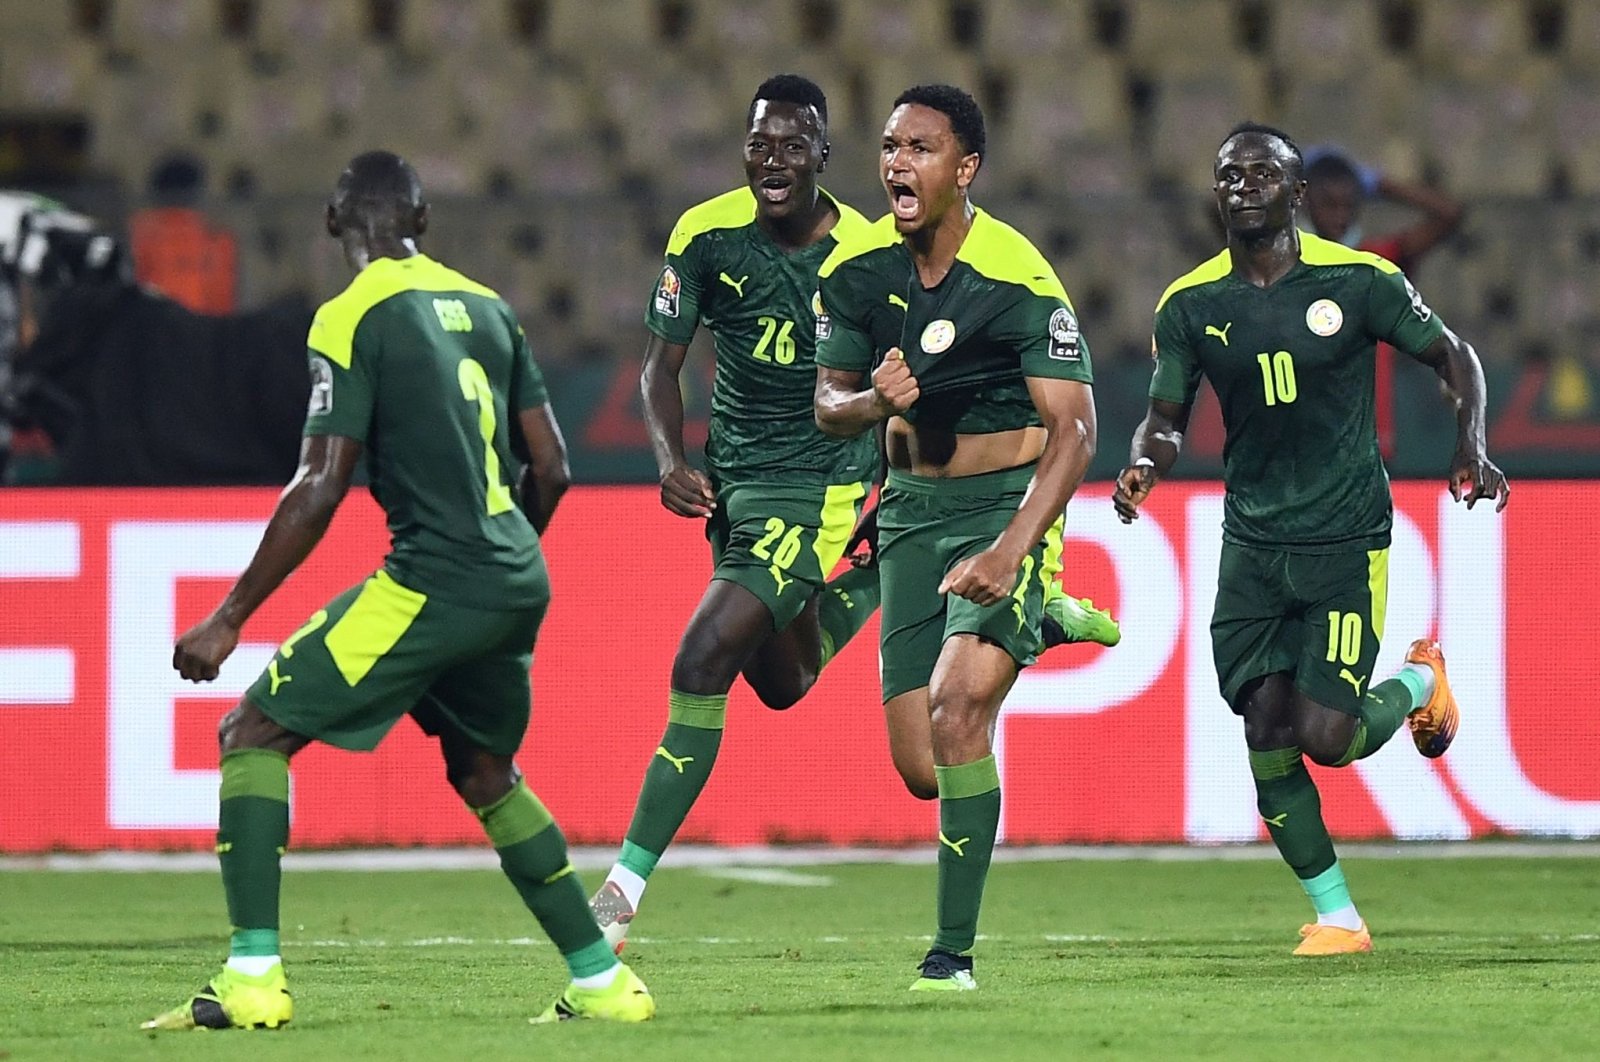 Senegal&#039;s Abdou Diallo (2nd R) celebrates after scoring in the AFCON semifinal against Burkina Faso, Yaounde, Cameroon, Feb. 2, 2022. (AFP Photo)